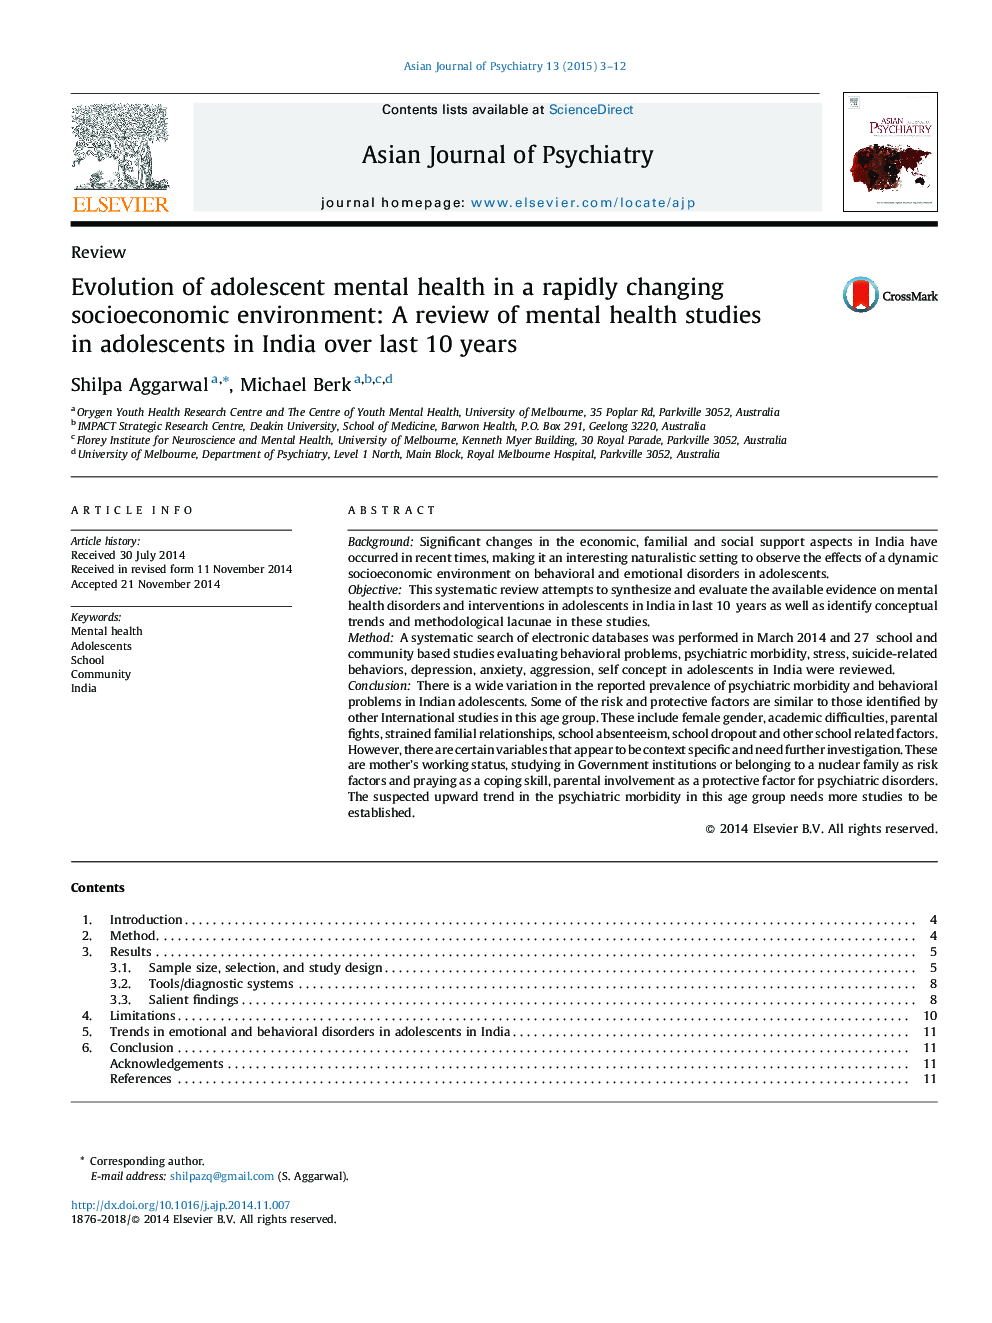 Evolution of adolescent mental health in a rapidly changing socioeconomic environment: A review of mental health studies in adolescents in India over last 10 years